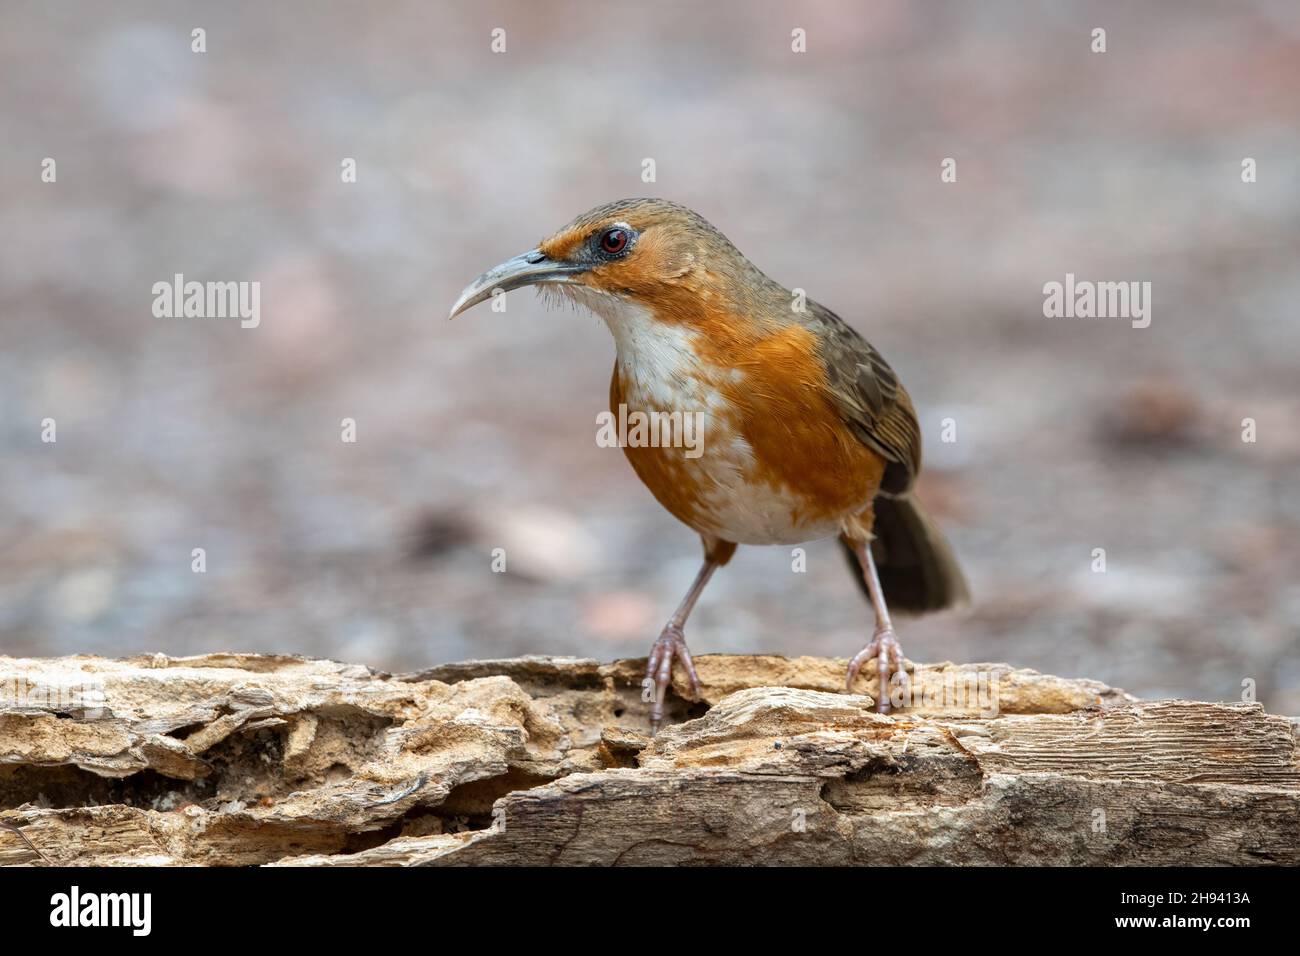 The rusty-cheeked scimitar babbler (Erythrogenys erythrogenys) is a species of bird in the family Timaliidae native to South-East Asia. Stock Photo